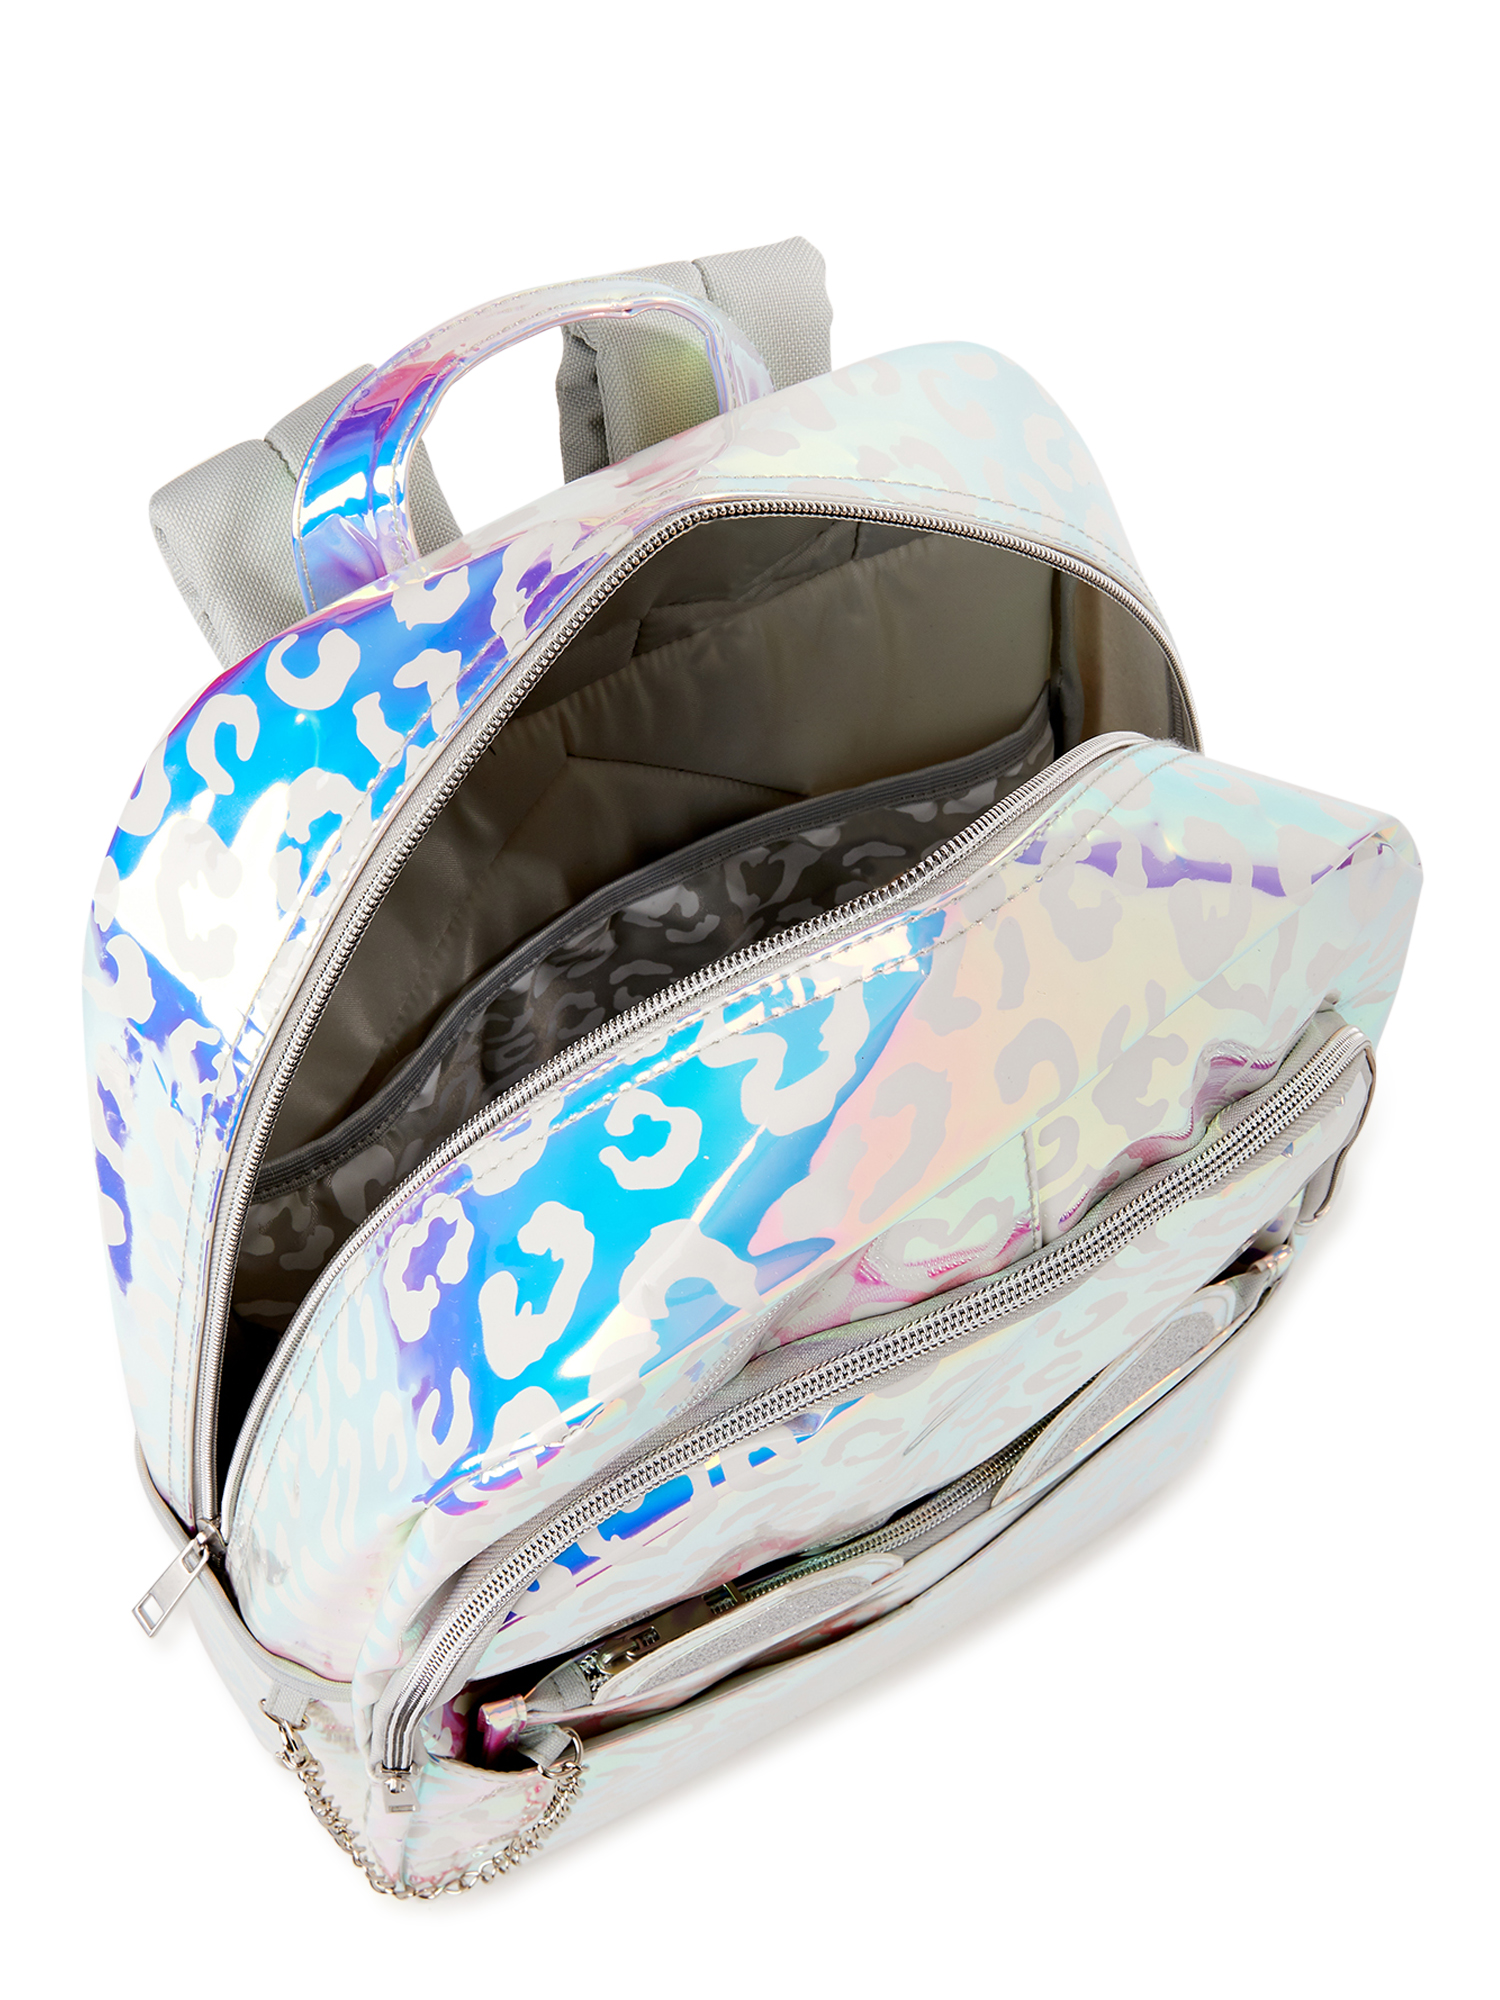 Wonder Nation Critters Iridescent Kitty Backpack Set, 2-Piece - image 4 of 6